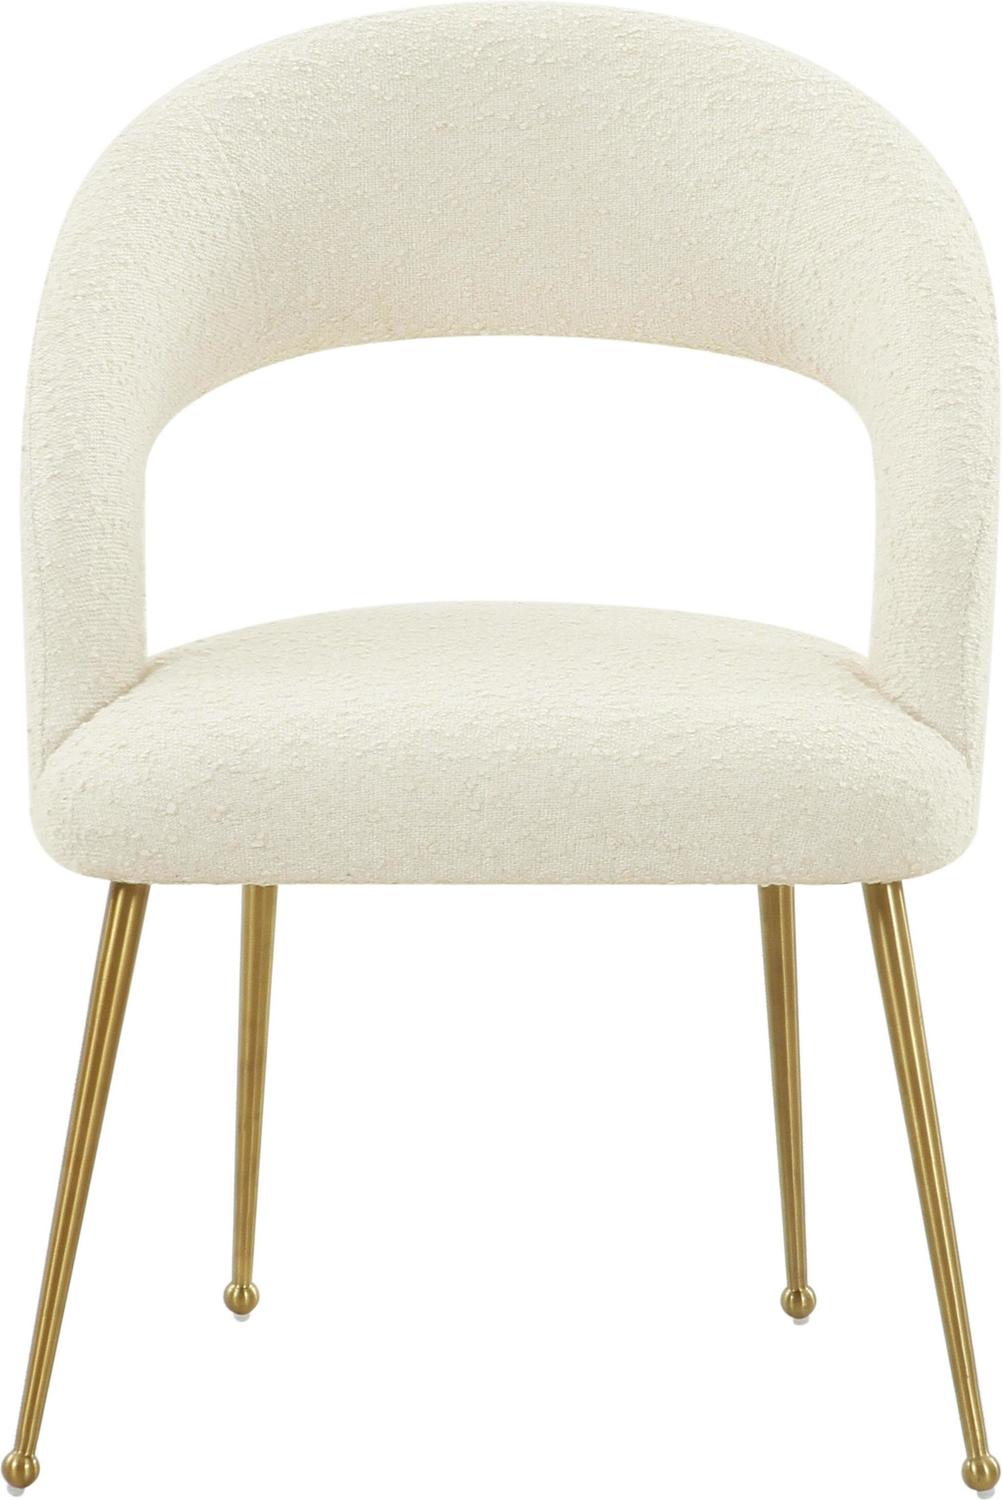 dining chairs on sale near me Tov Furniture Dining Chairs Cream